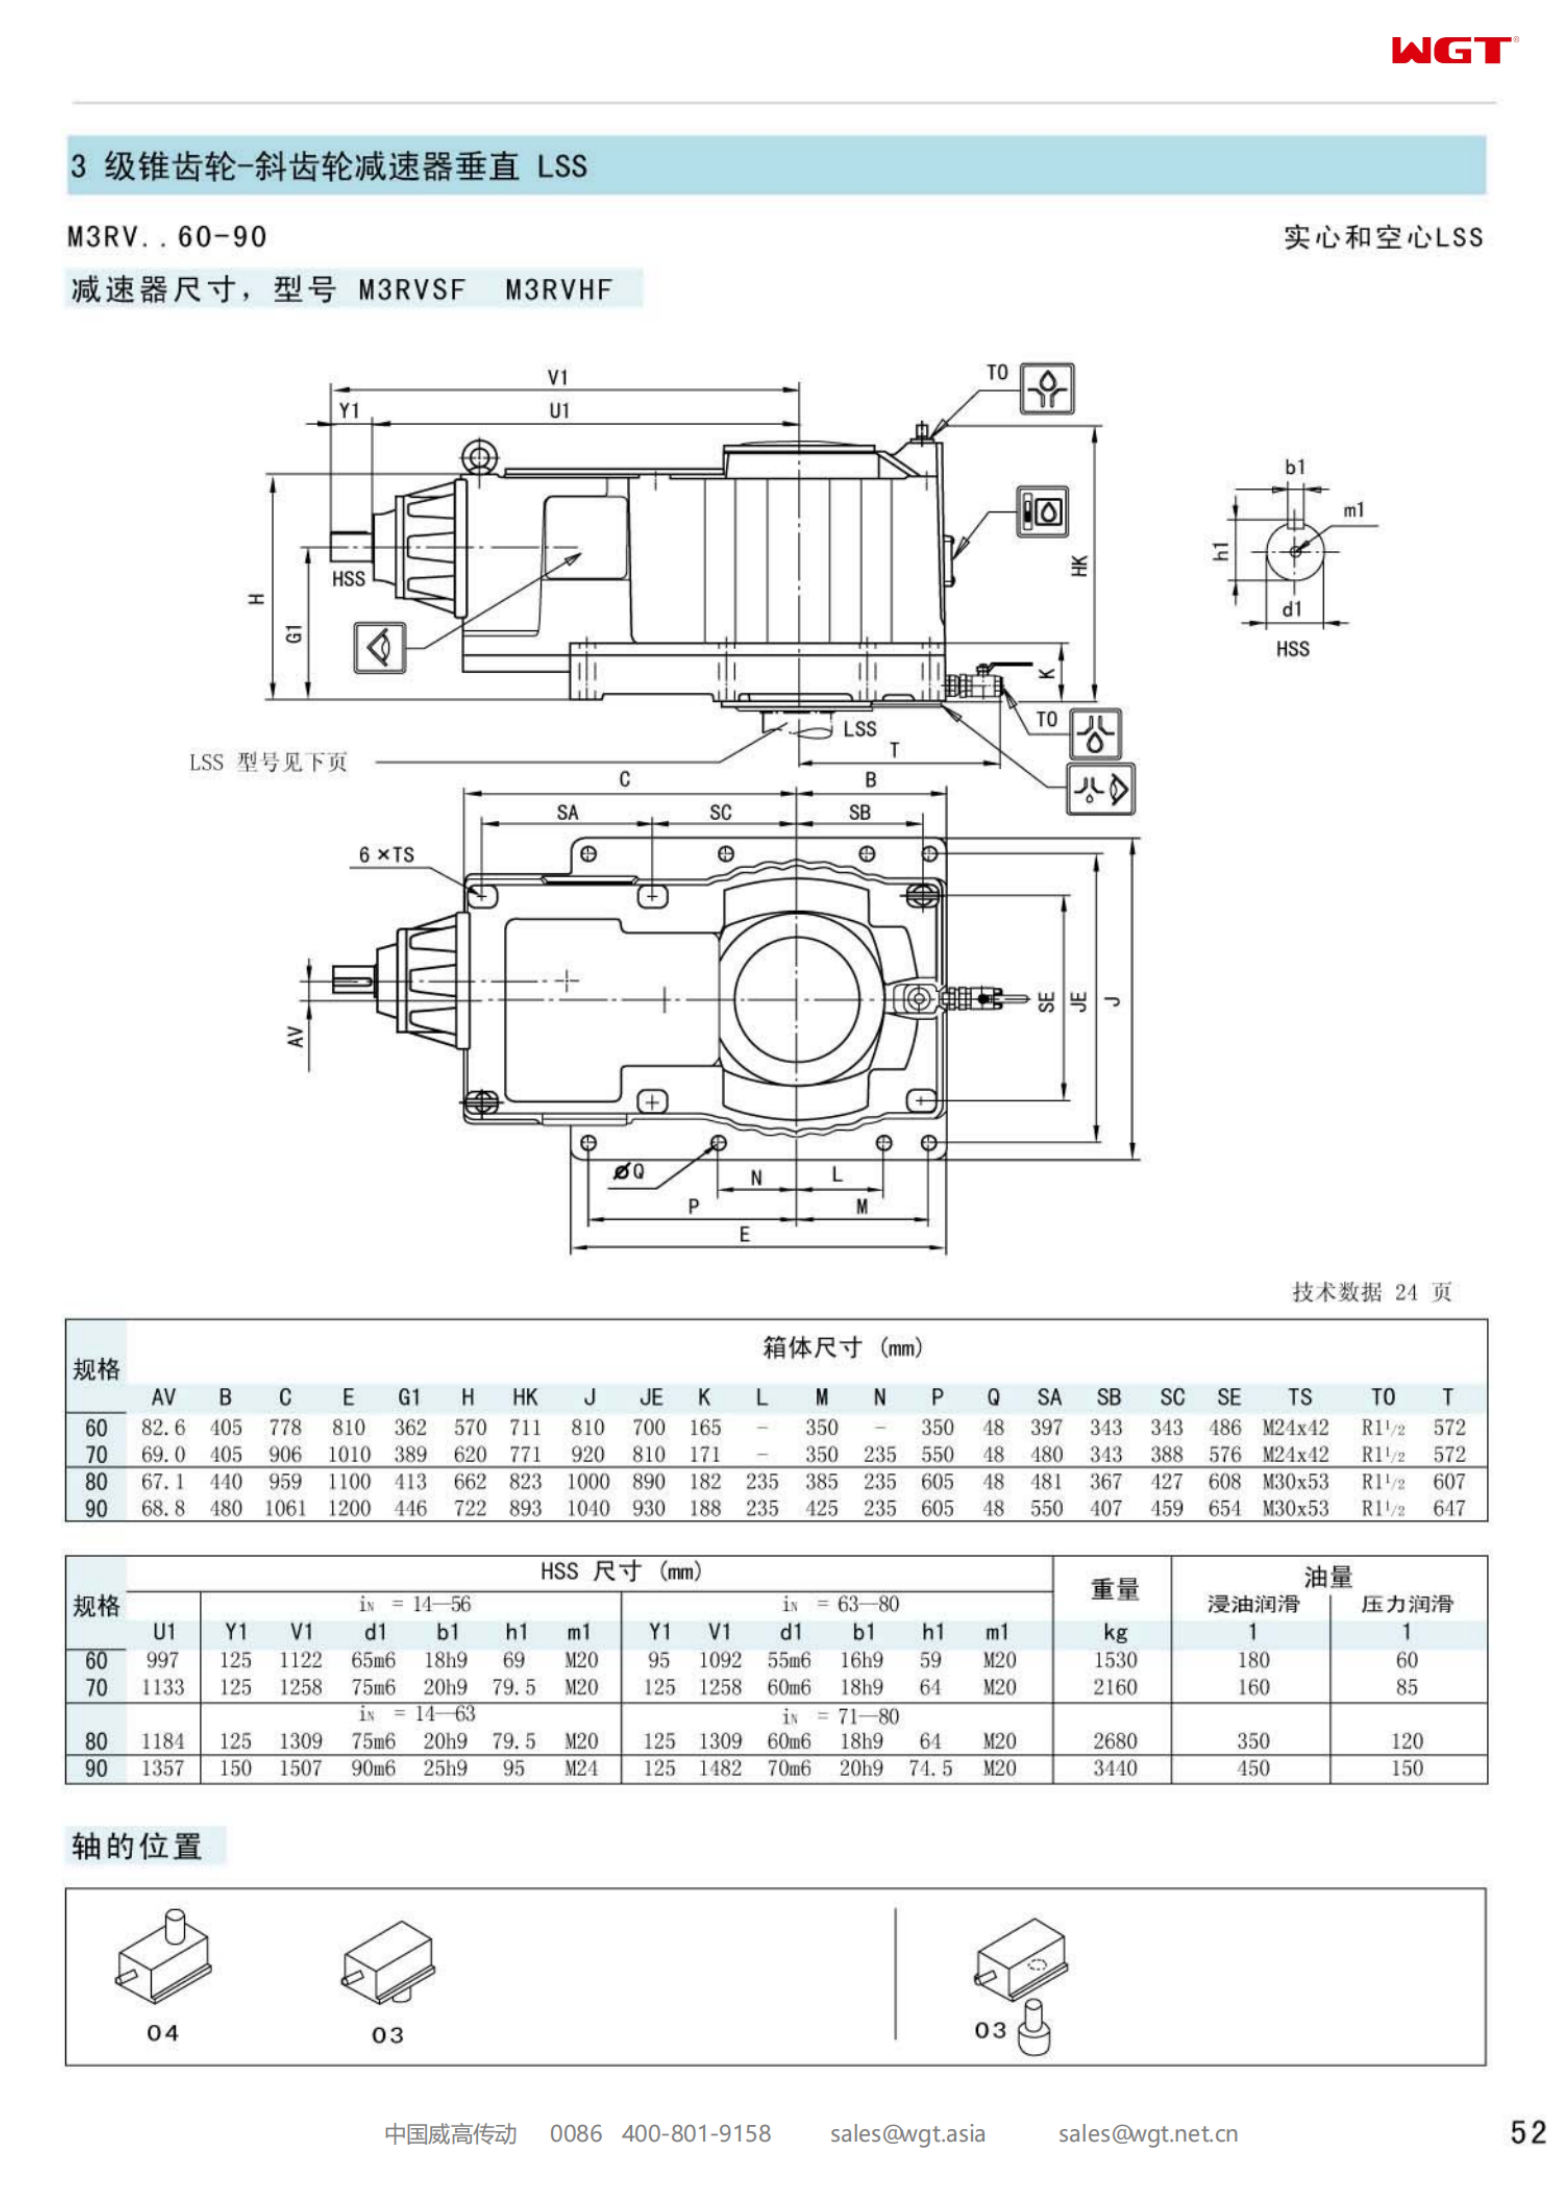 M3RVSF70 Replace_SEW_M_Series Gearbox